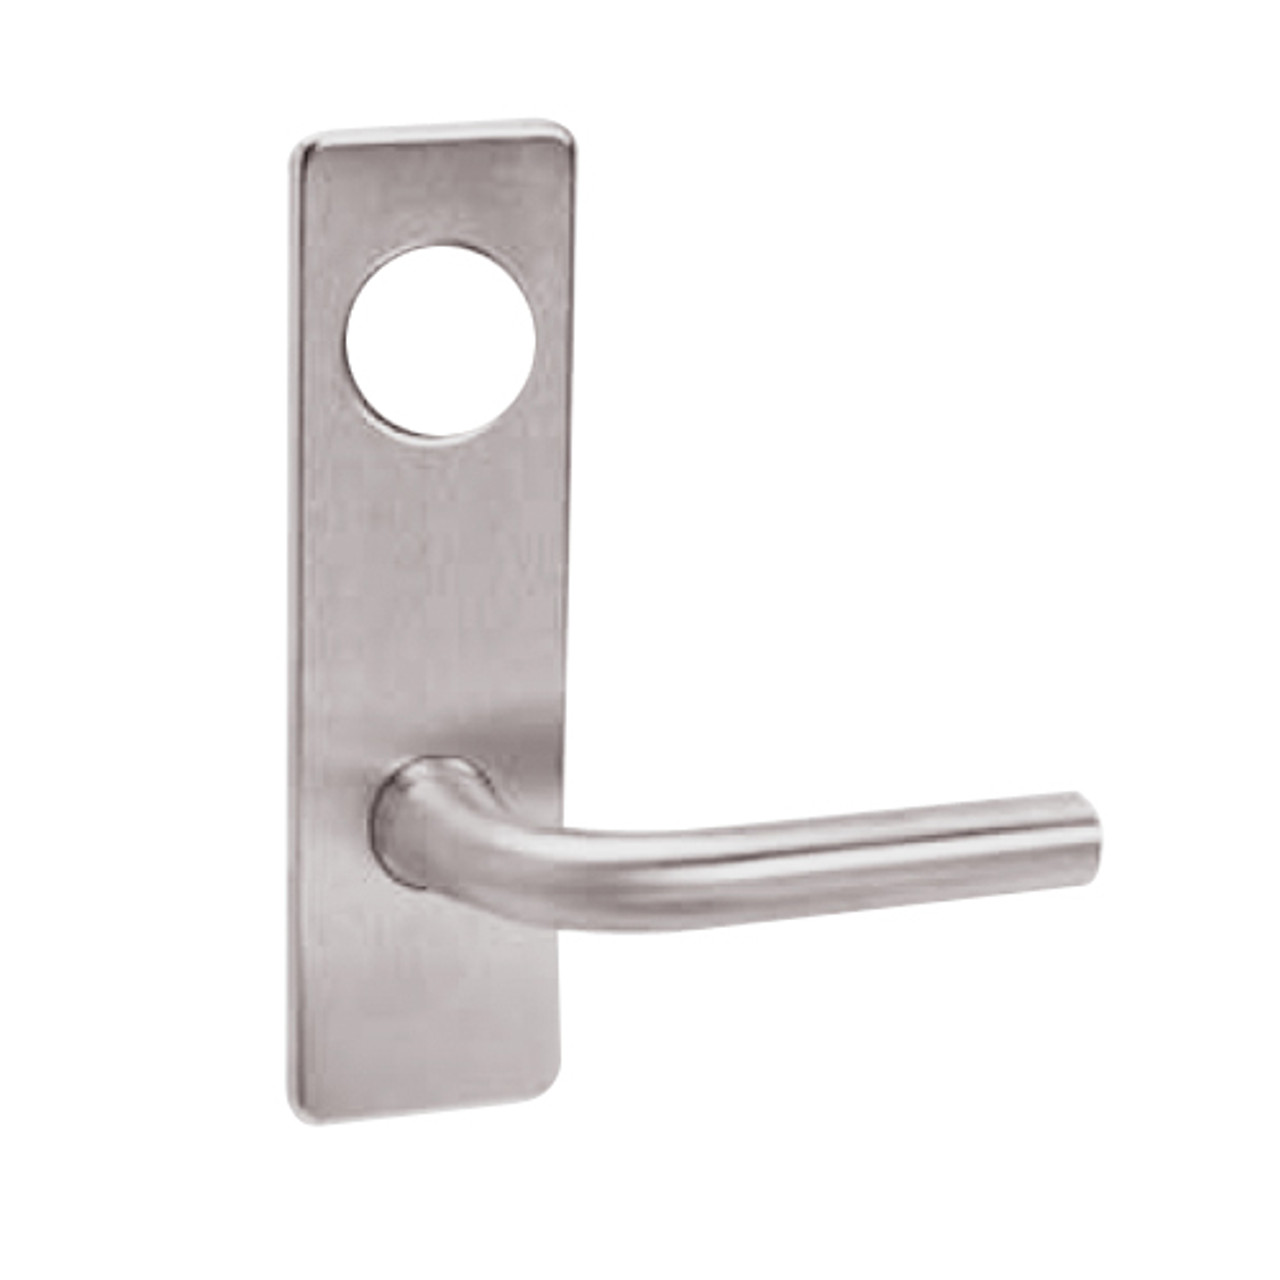 ML2024-RSM-630-M31 Corbin Russwin ML2000 Series Mortise Entrance Trim Pack with Regis Lever in Satin Stainless